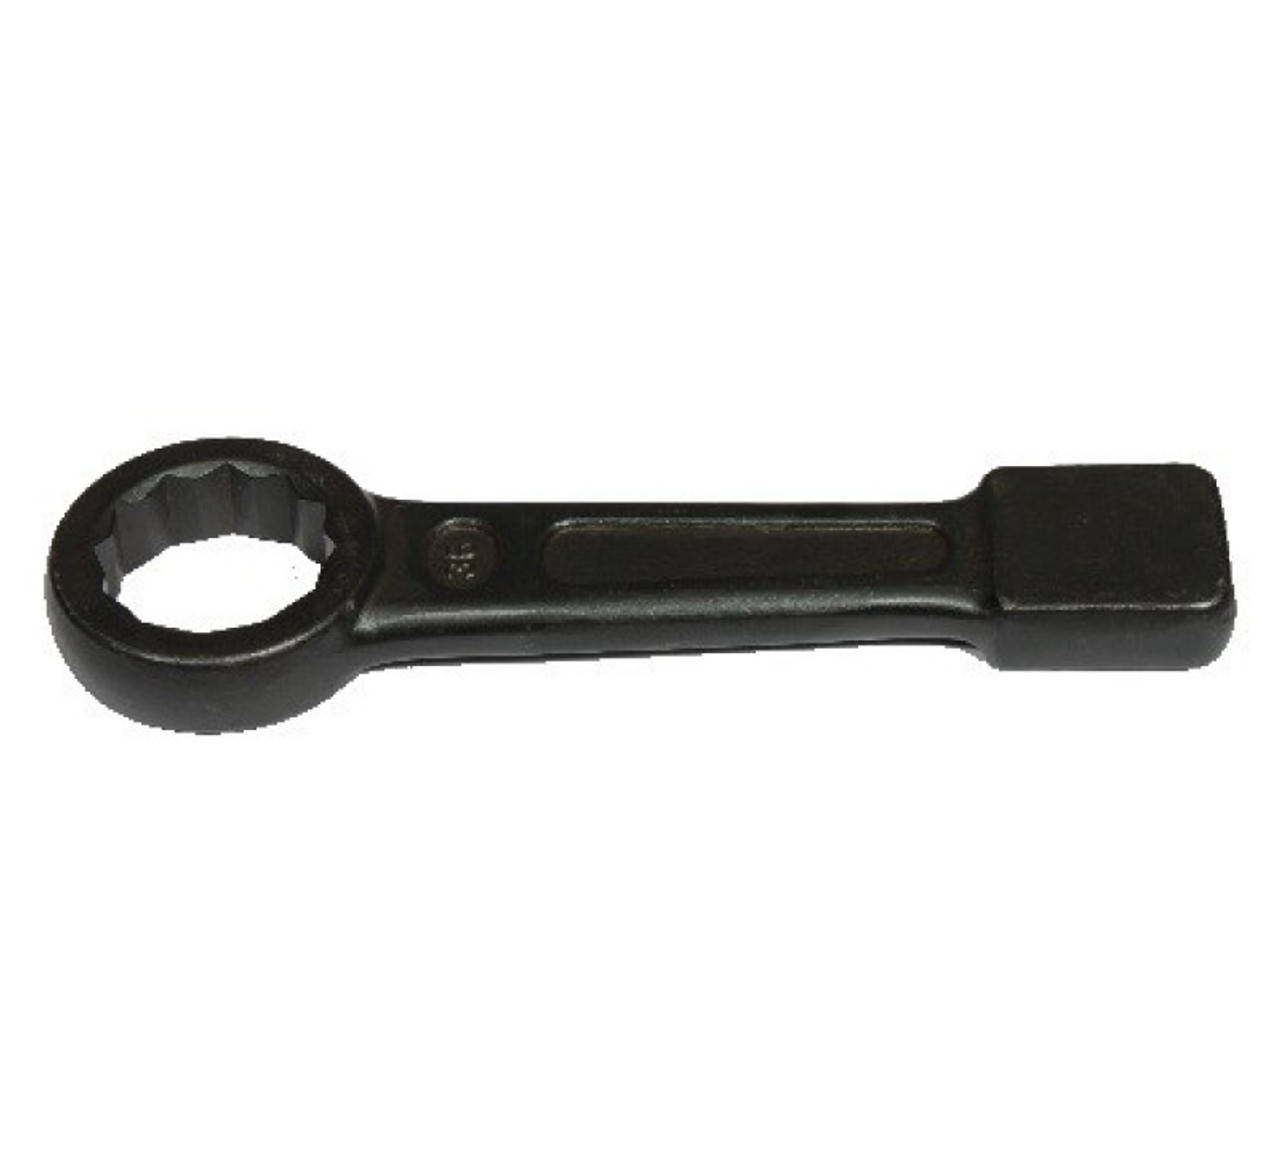 IMPA 611153 Striking wrench single open end 65 mm Kukko 133-65 (deliverytime 2 days - ex works factory)